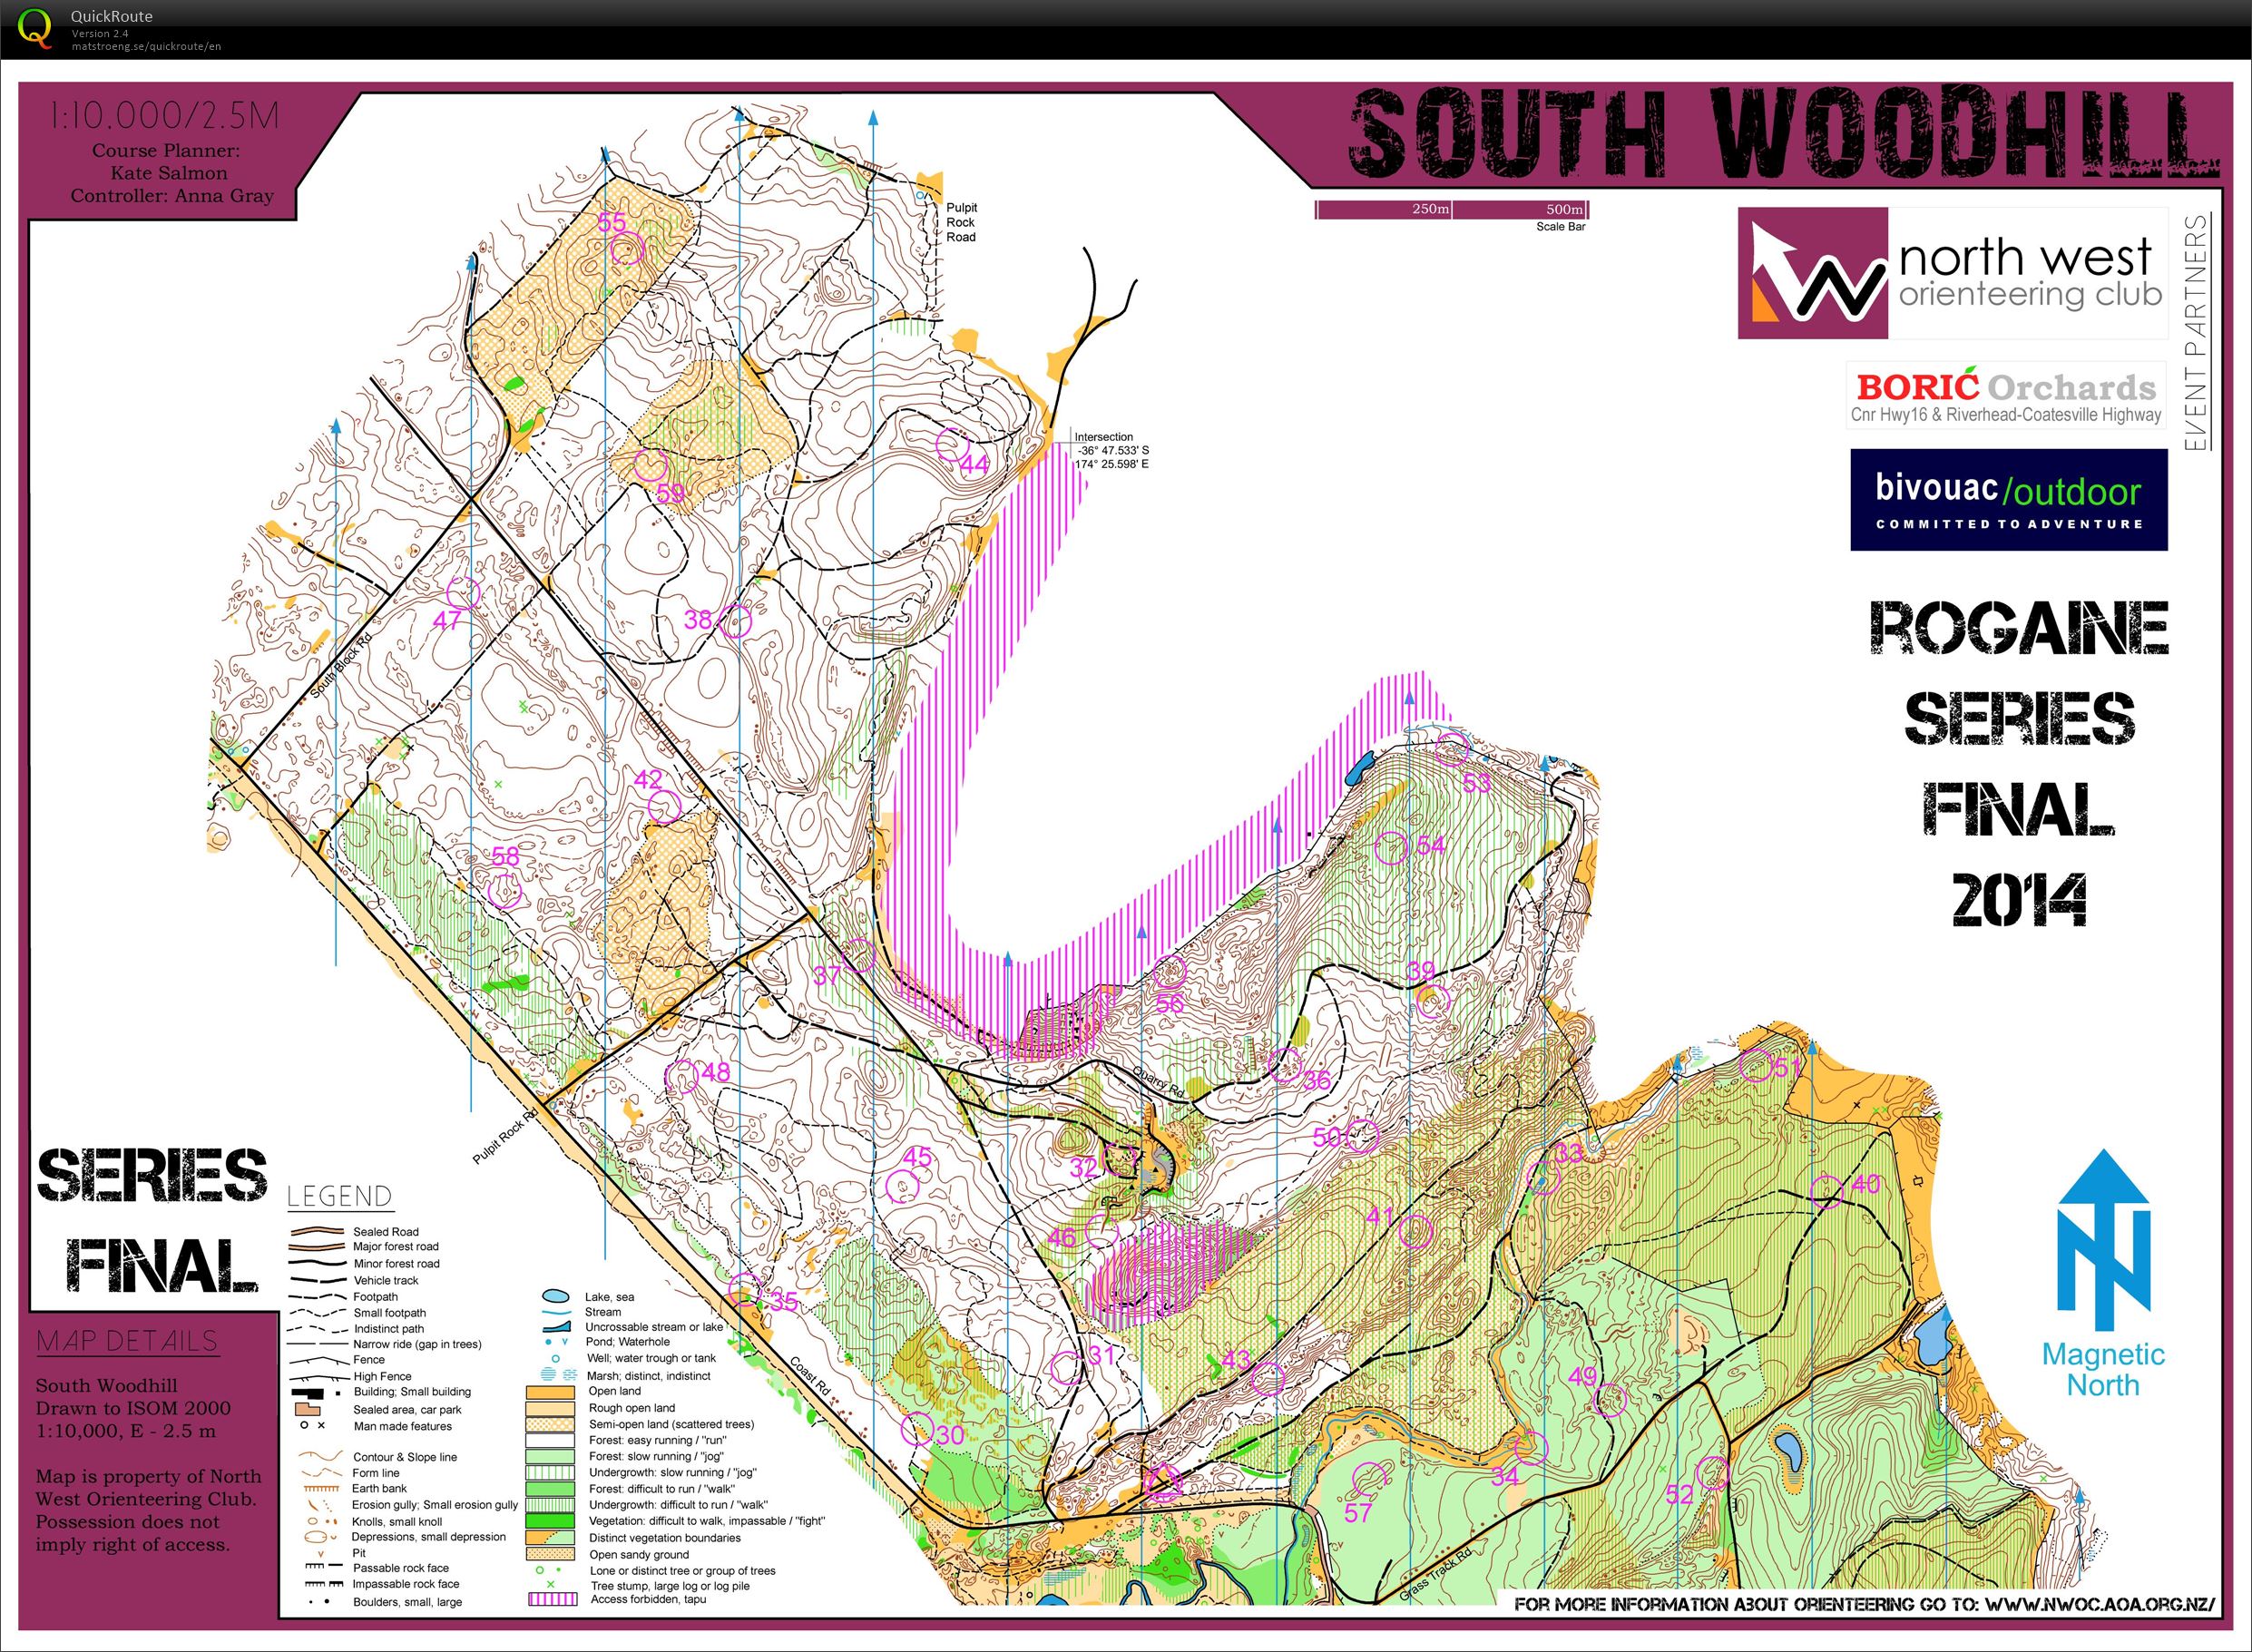 Rogaine Series - Part 4 - South Woodhill (08-06-2014)